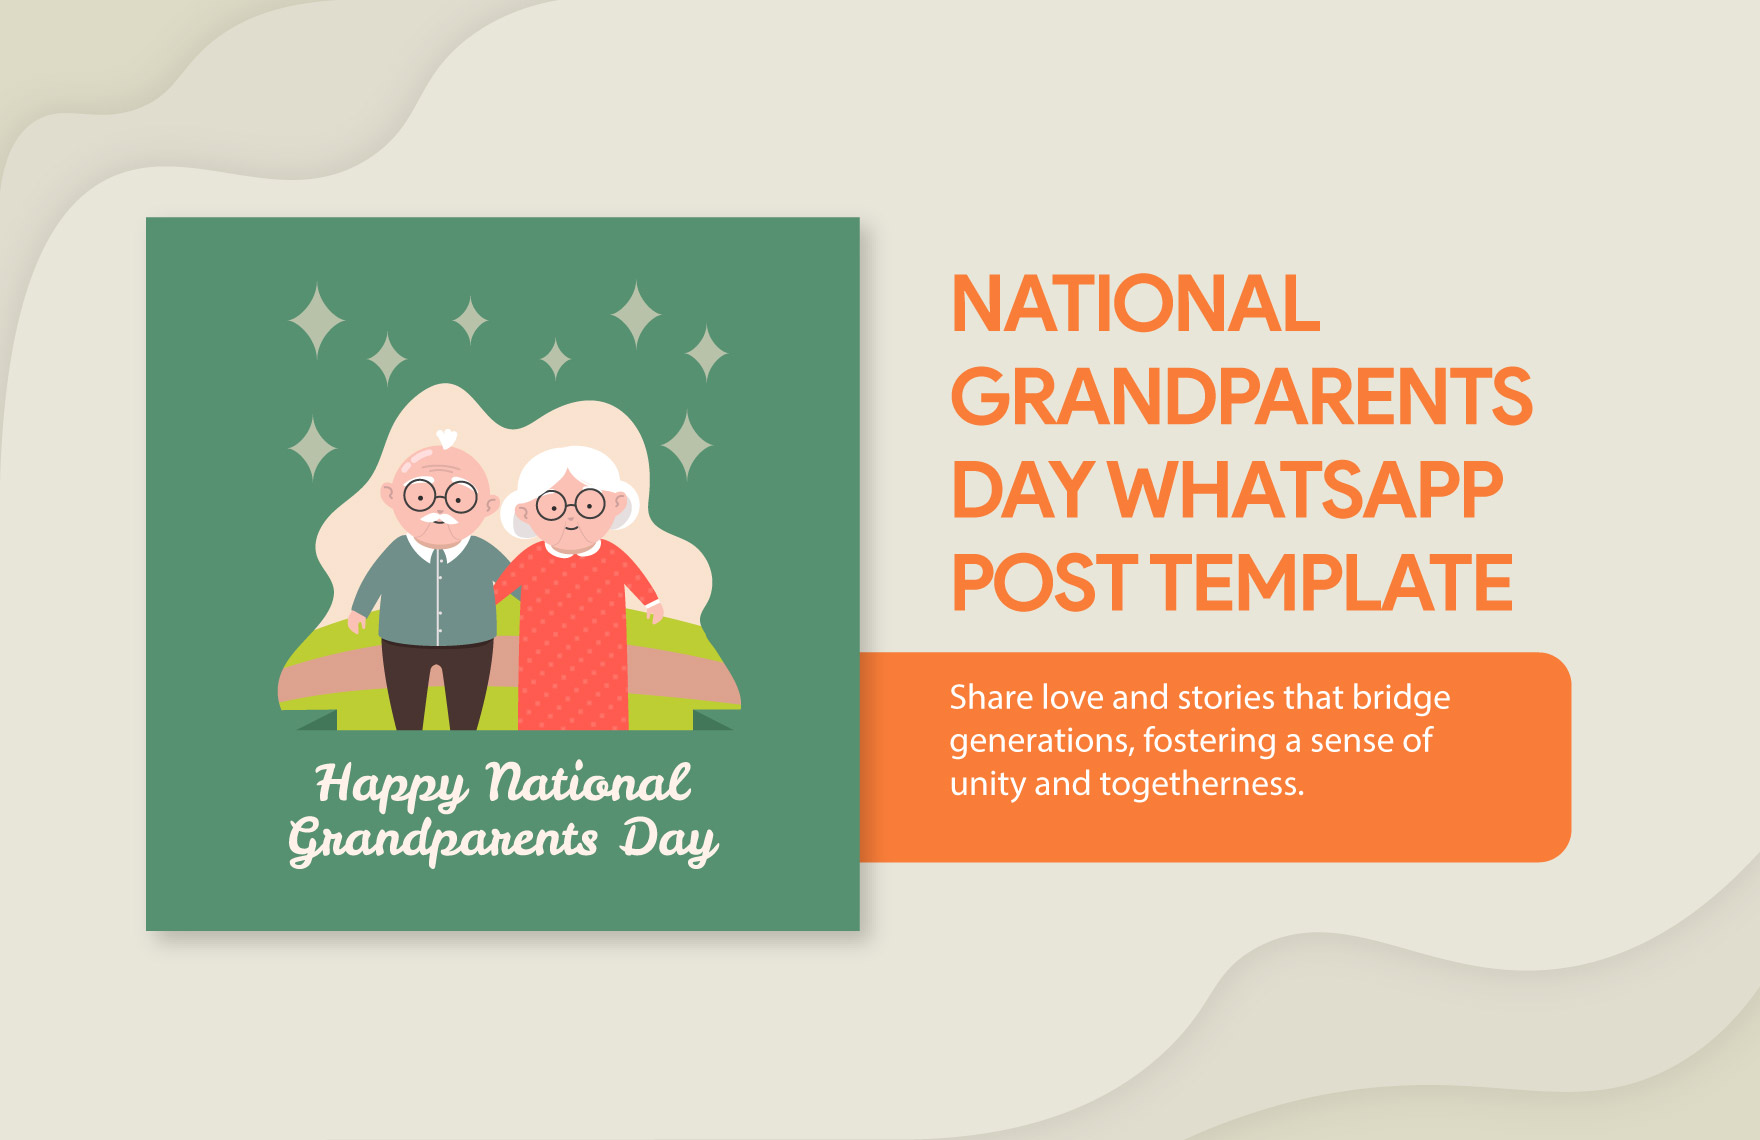 National Grandparents Day WhatsApp Post Template